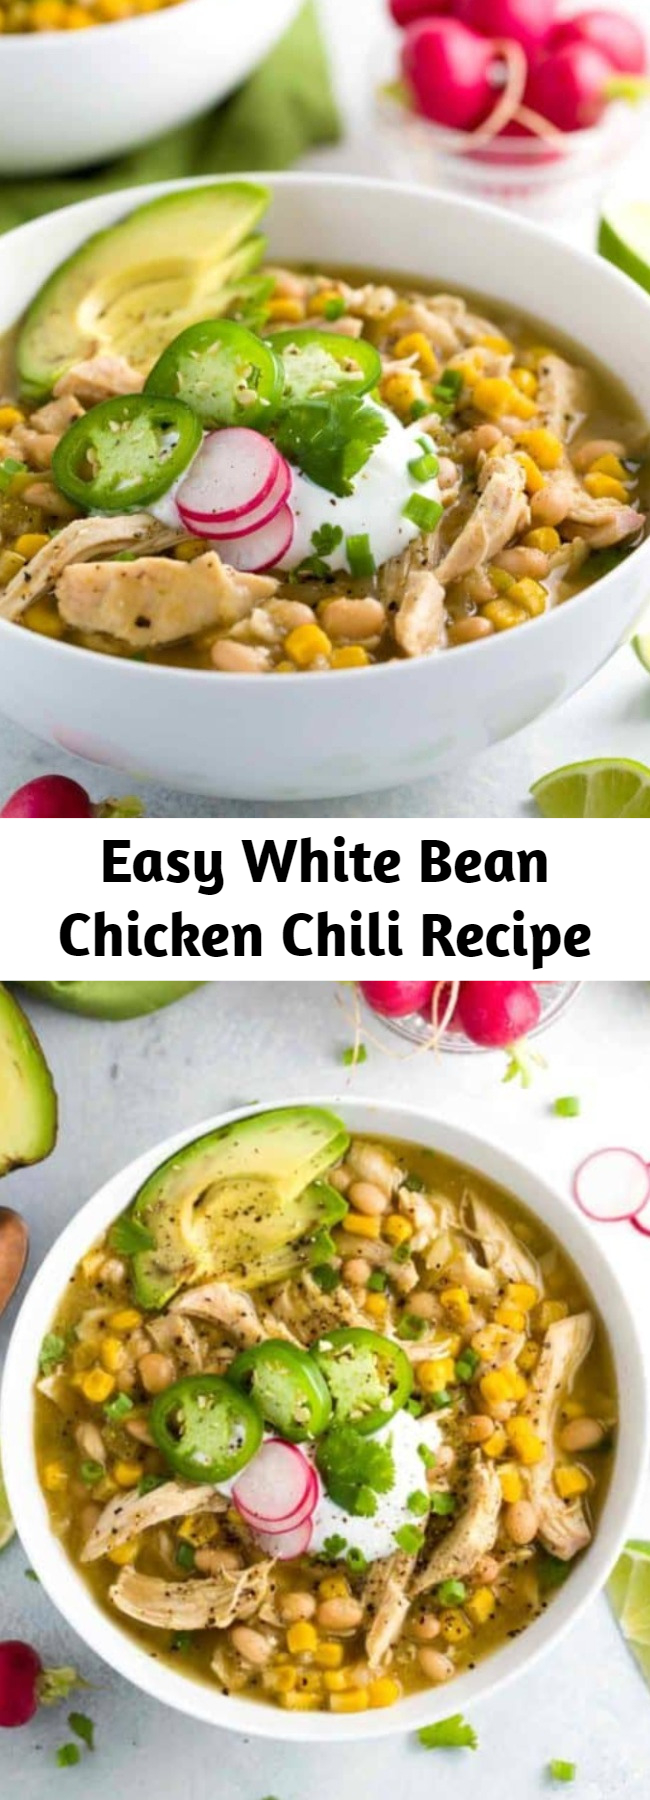 Easy White Bean Chicken Chili Recipe - White bean chicken chili simmered in a crockpot with whole roasted jalapenos, tender beans, corn, and lean chicken breast. This recipe is fantastic if I don’t say so myself!